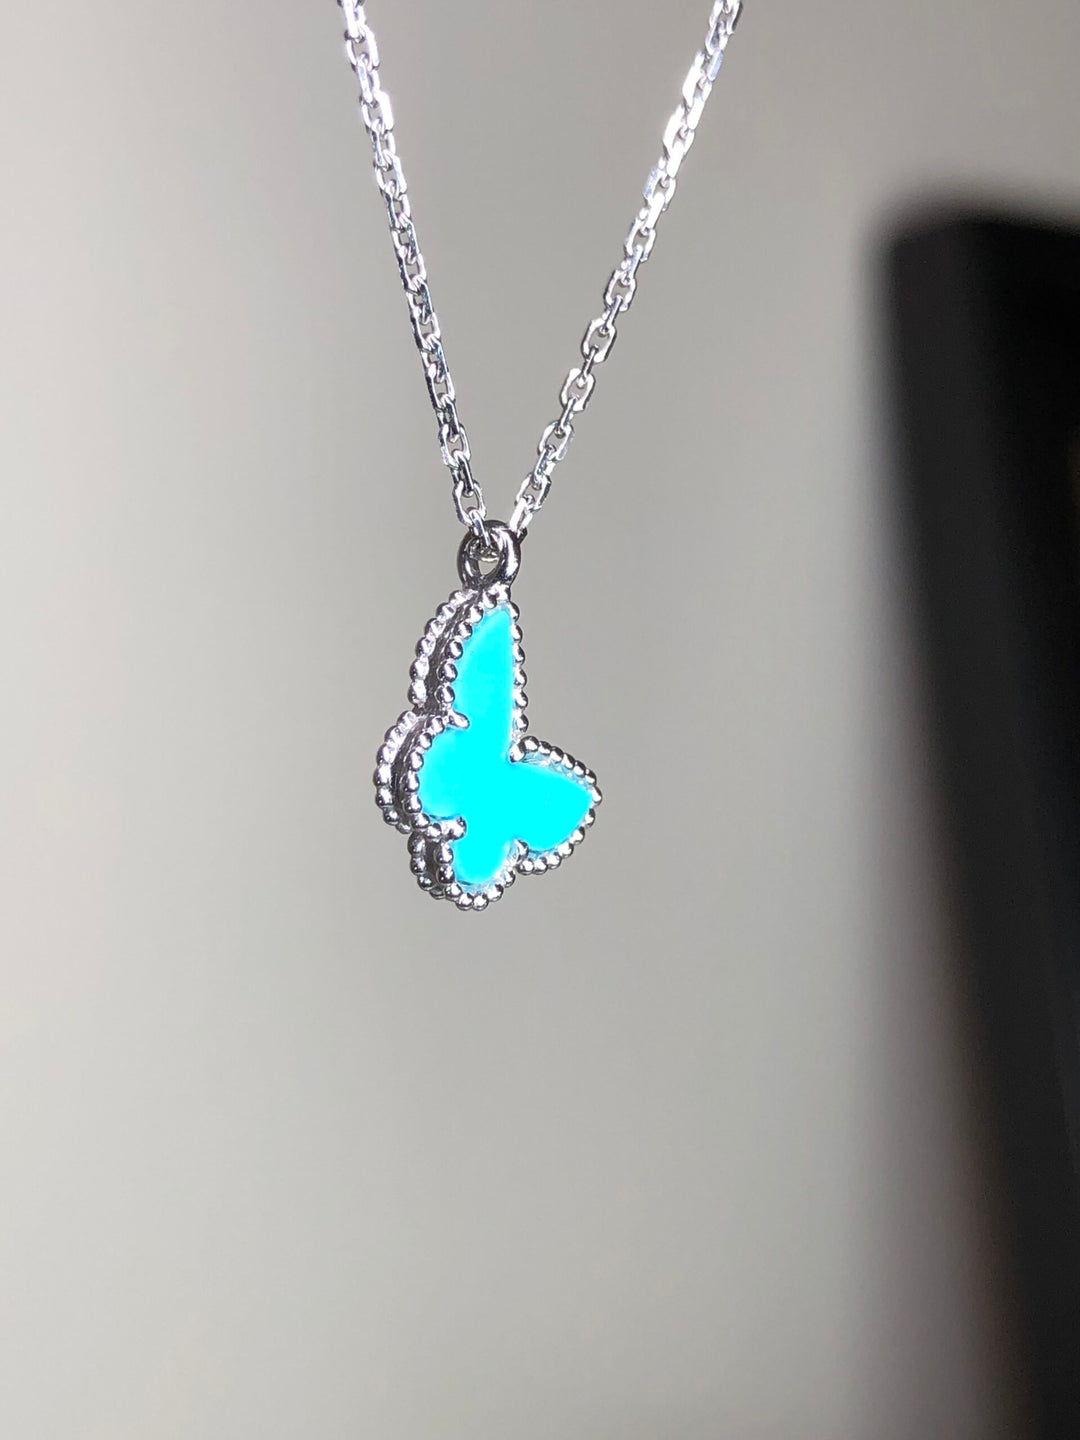 Van Cleef & Arpels Sweet Alhambra 18K White Gold Turquoise Pendant Necklace -SOLD